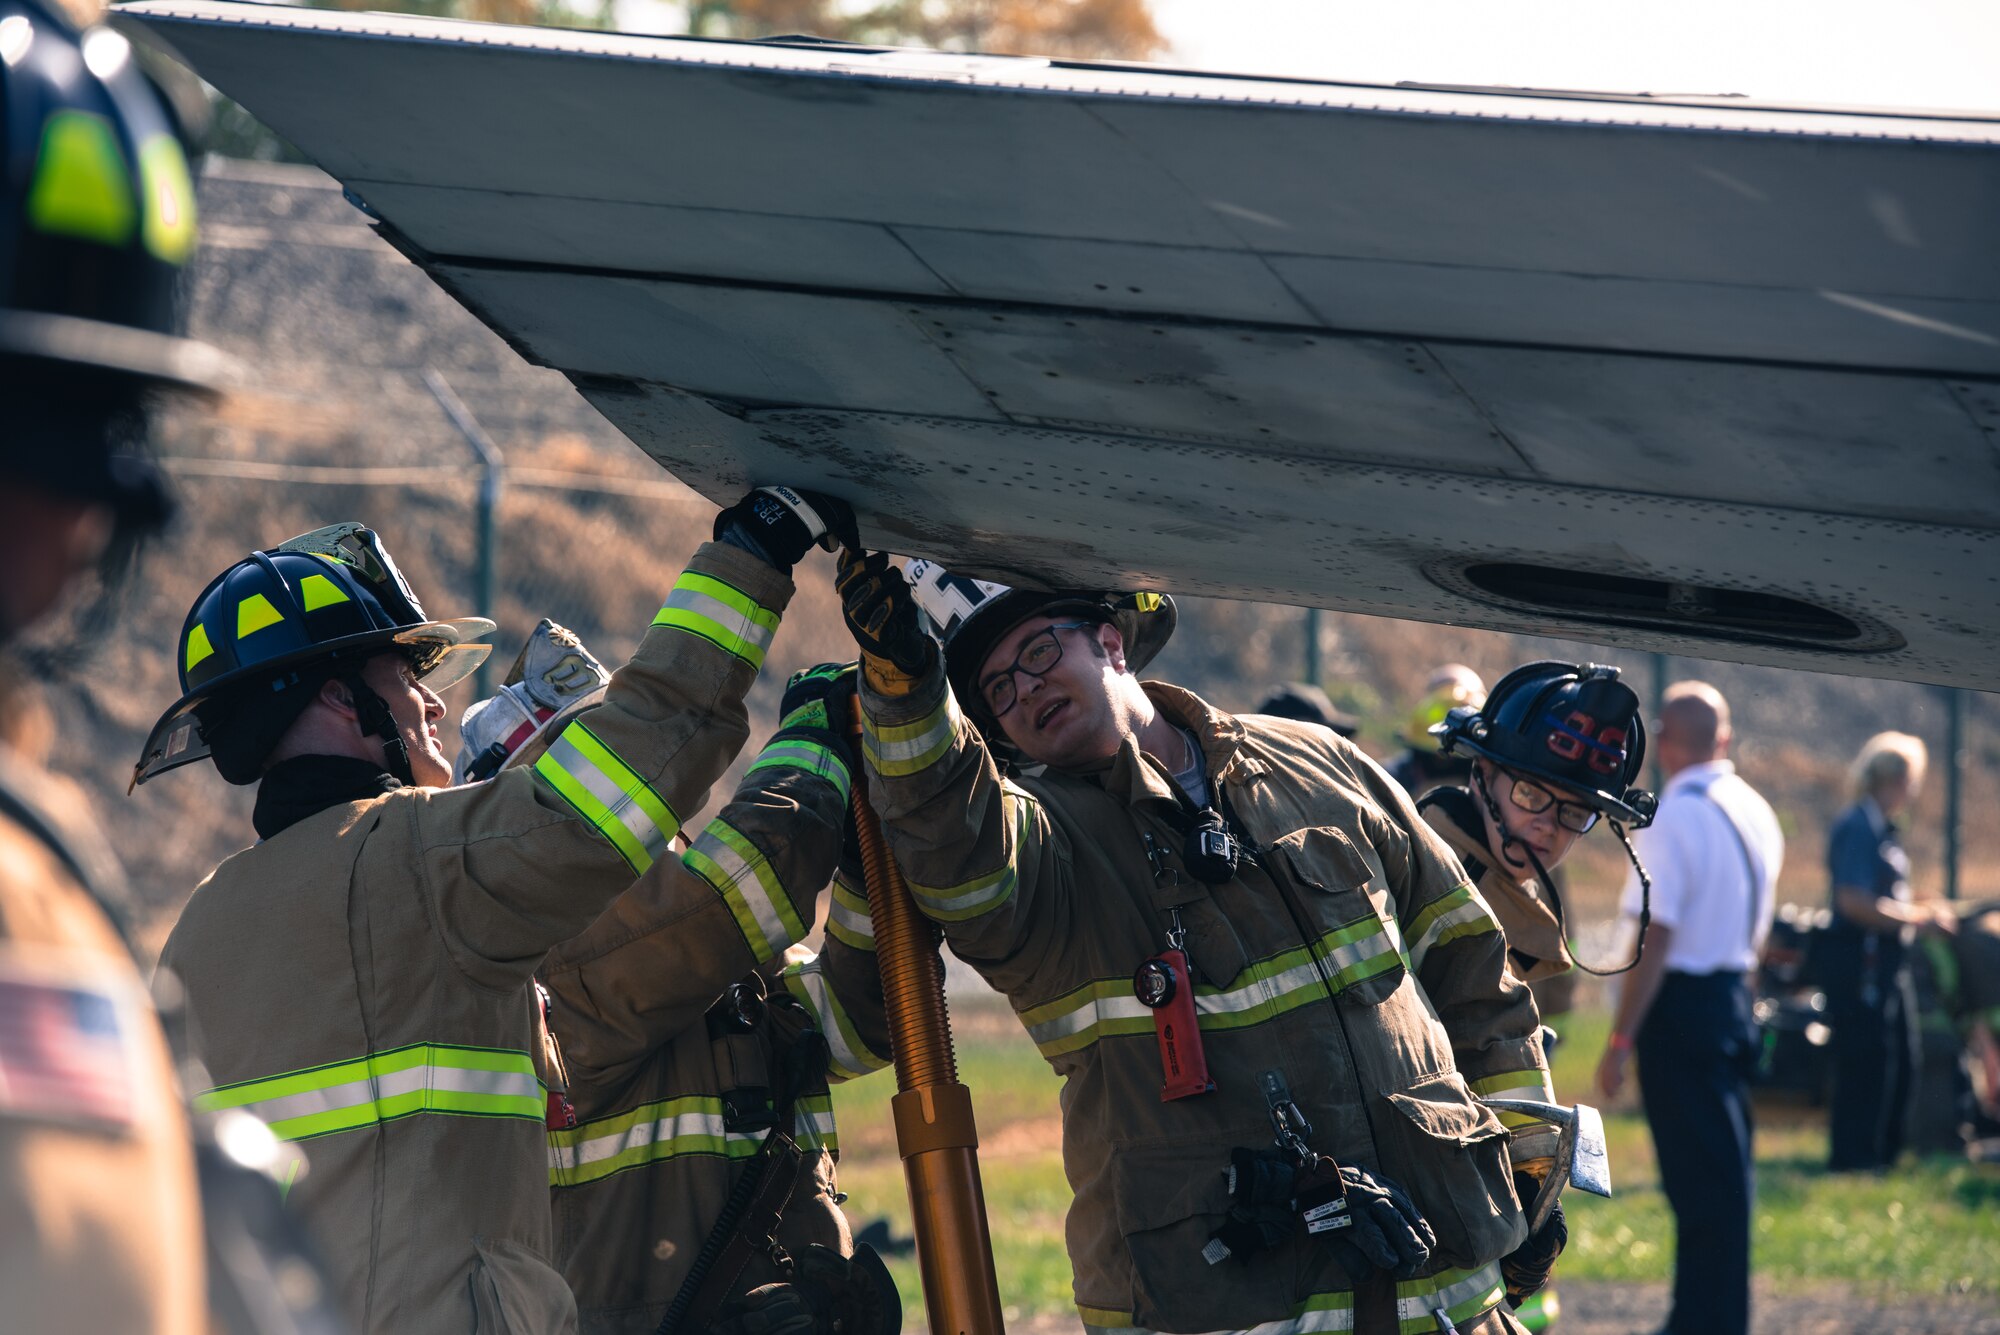 Firefighters from the 193rd Special Operations Civil Engineering Squadron, Cumberland, Dauphin, Lancaster and York counties work to hoist up the wing of a simulated aircraft crash during an exercise held at the September 21, 2019, at Harrisburg International Airport, in Middletown, Pennsylvania.